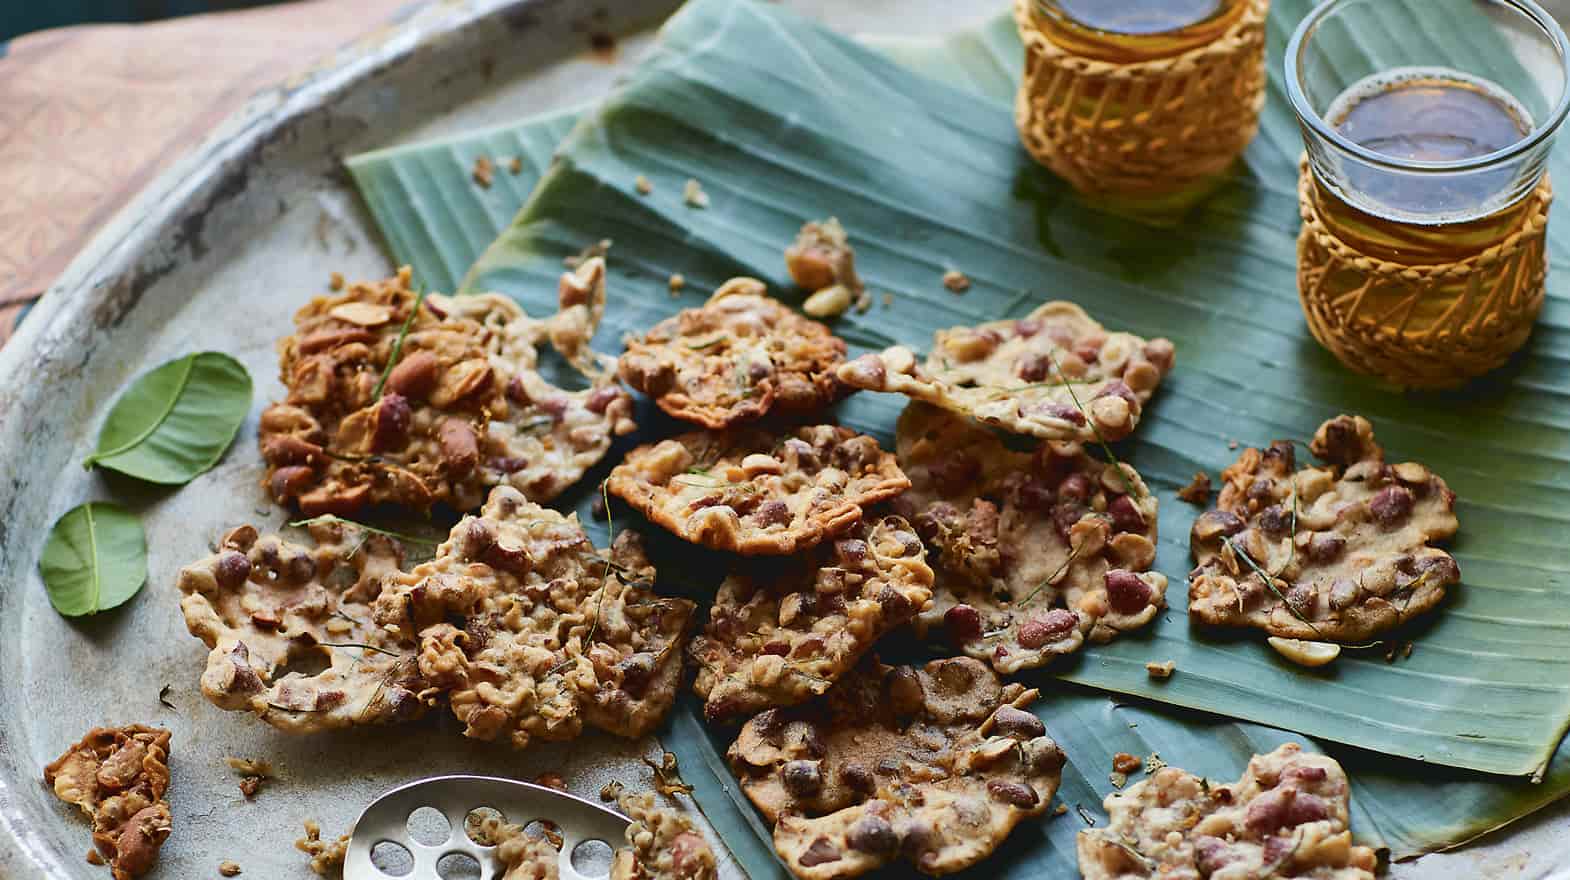 peanut & lime leaf crackers from Fire Island by Eleanor FOrd